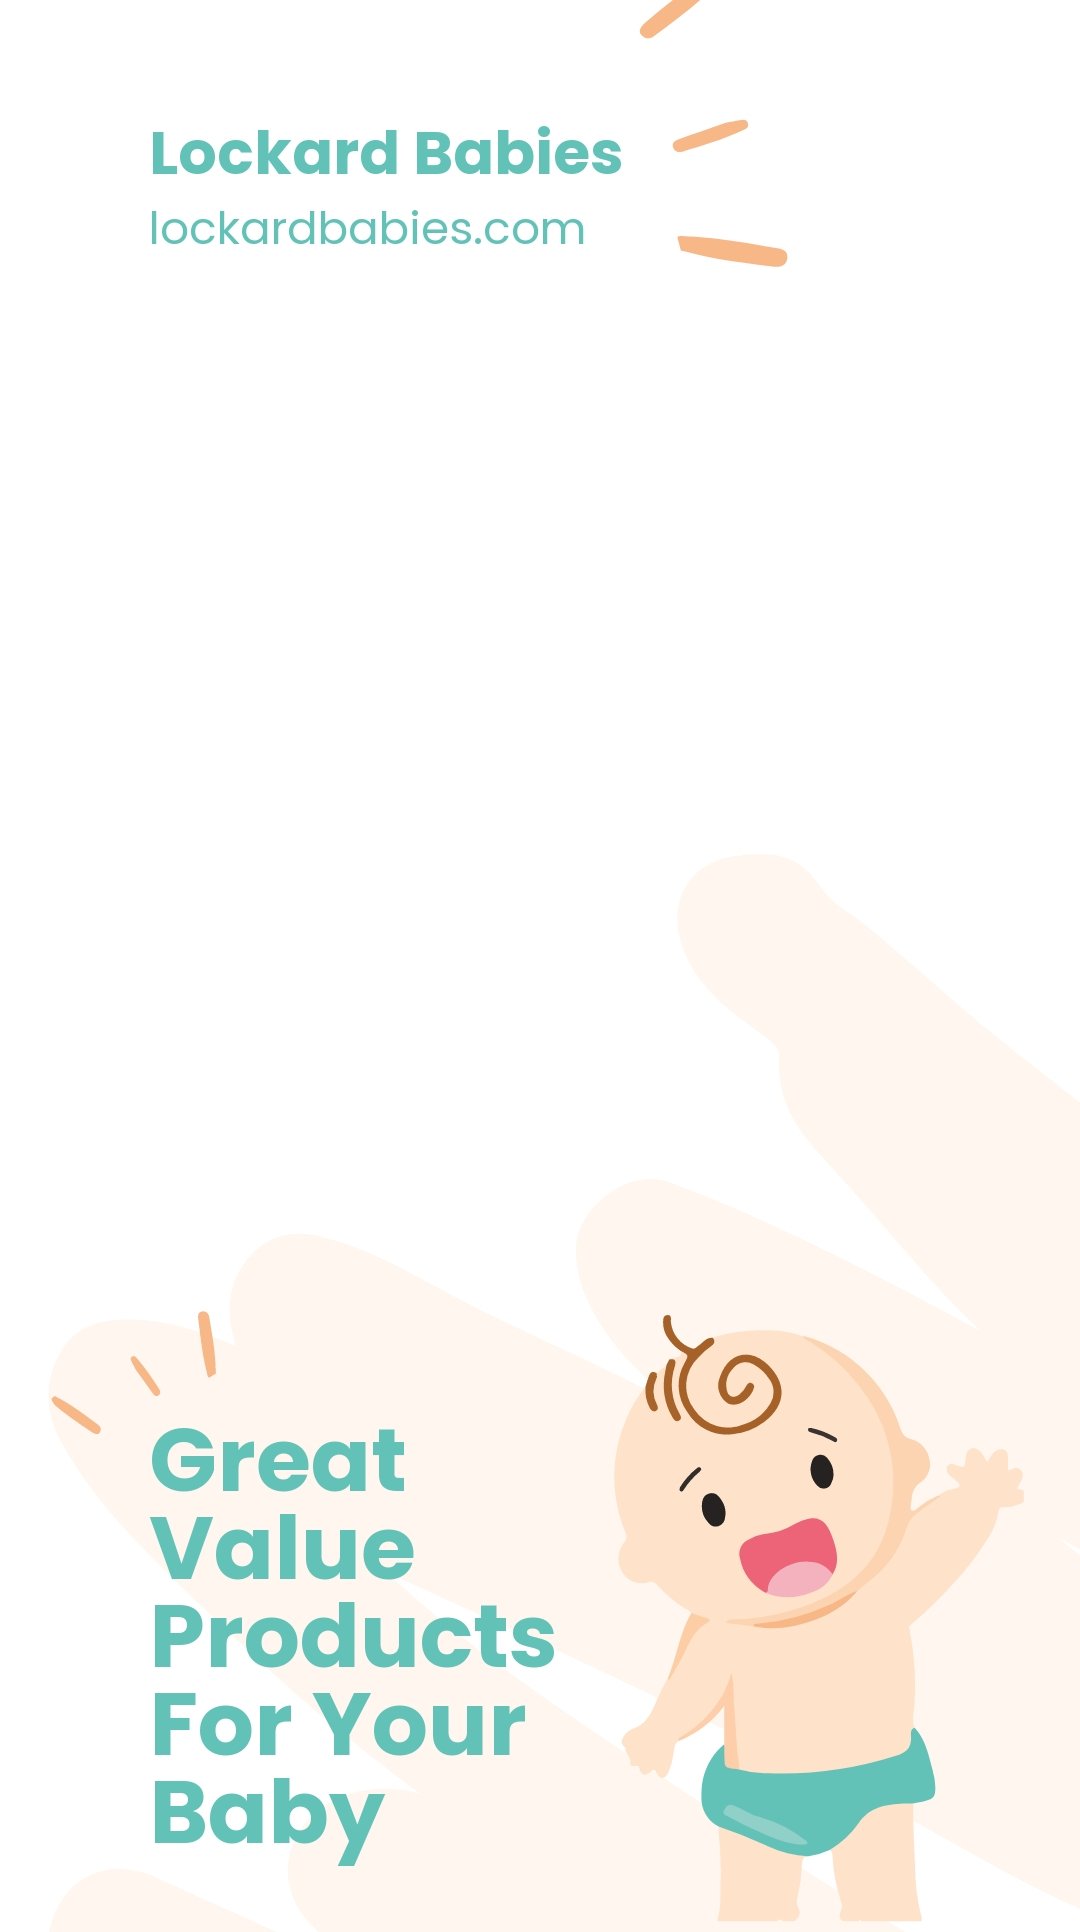 Online Baby Store Snapchat Geofilter Template